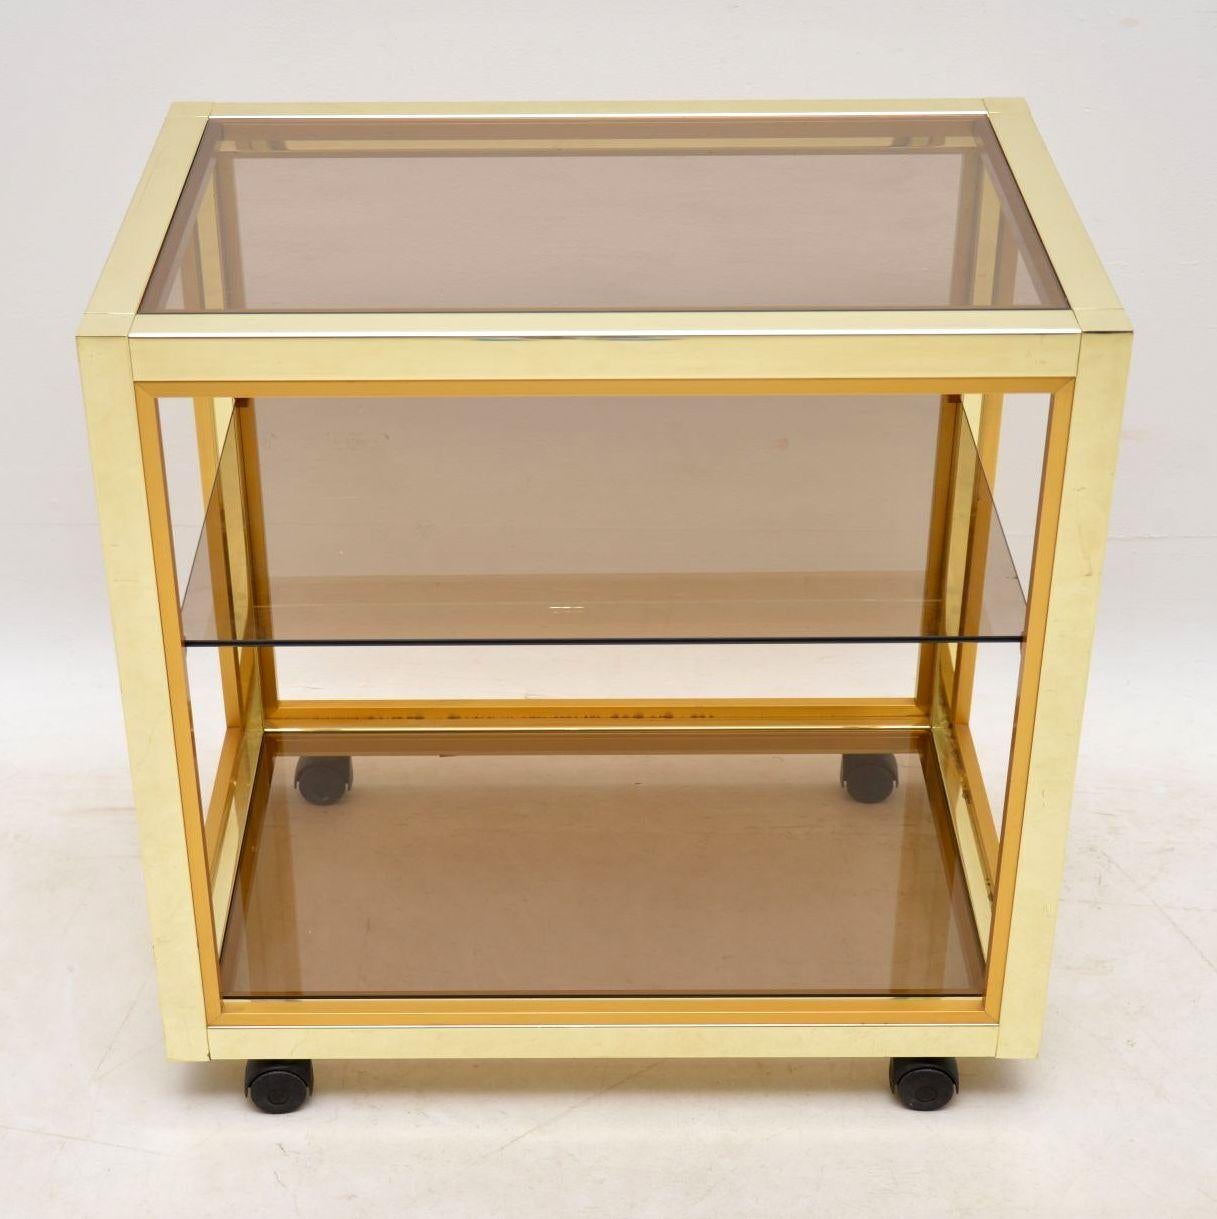 A stunning vintage Italian drinks trolley designed by Renato Zevi, this dates from the 1970’s. The brass plated aluminium frame has some minor surface wear here and there, and some marks around the top edge, but overall the condition is very good